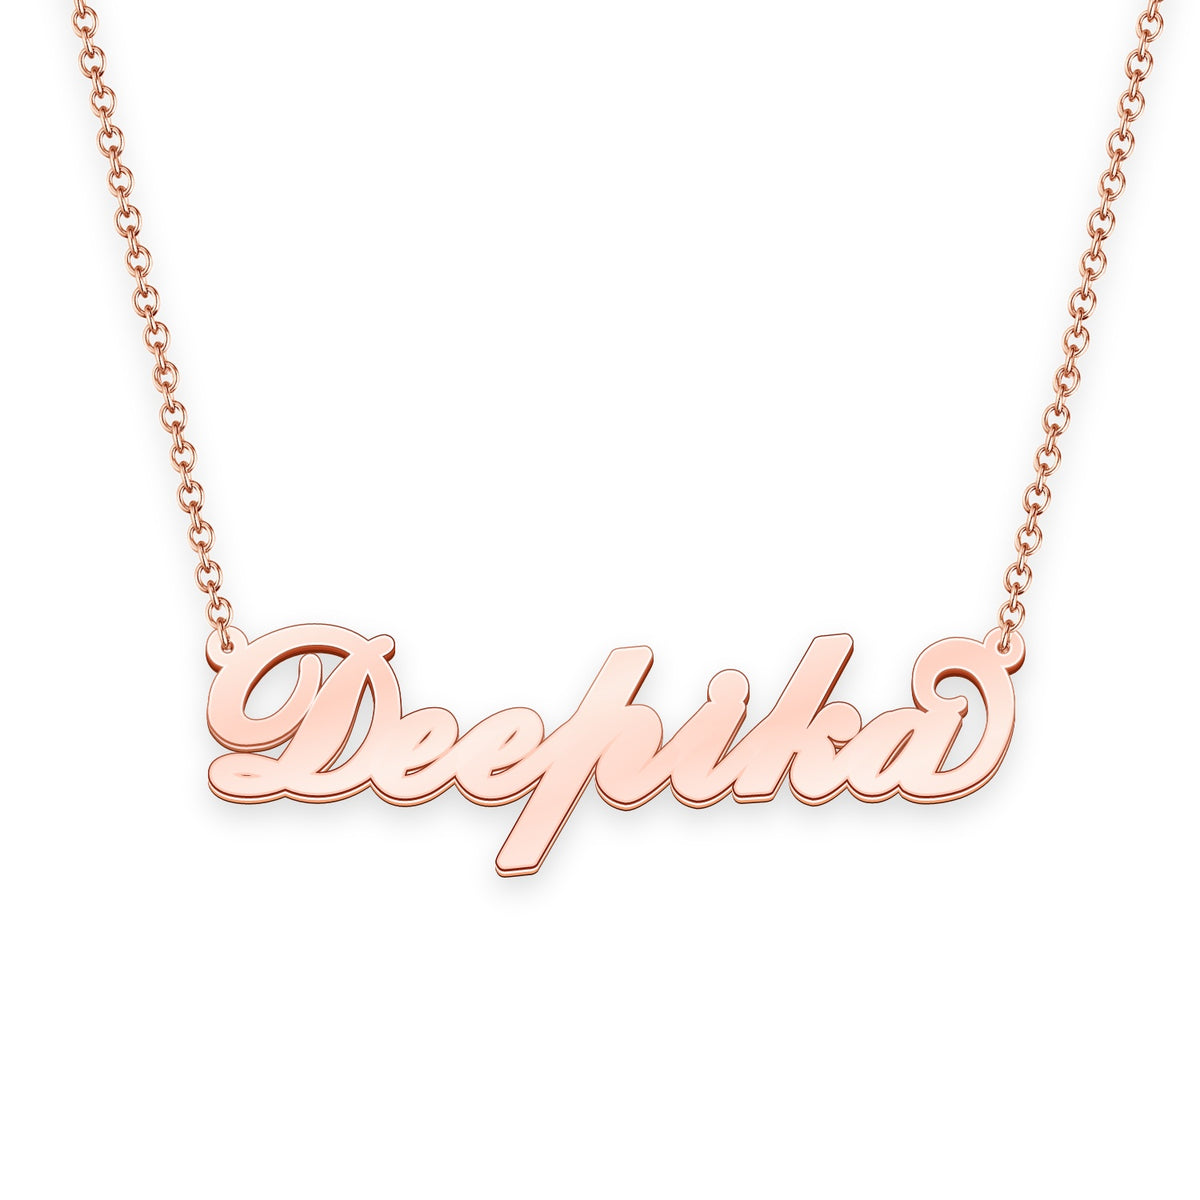 Deepika name necklace Gold Custom Necklace, Personalized Gifts For ...